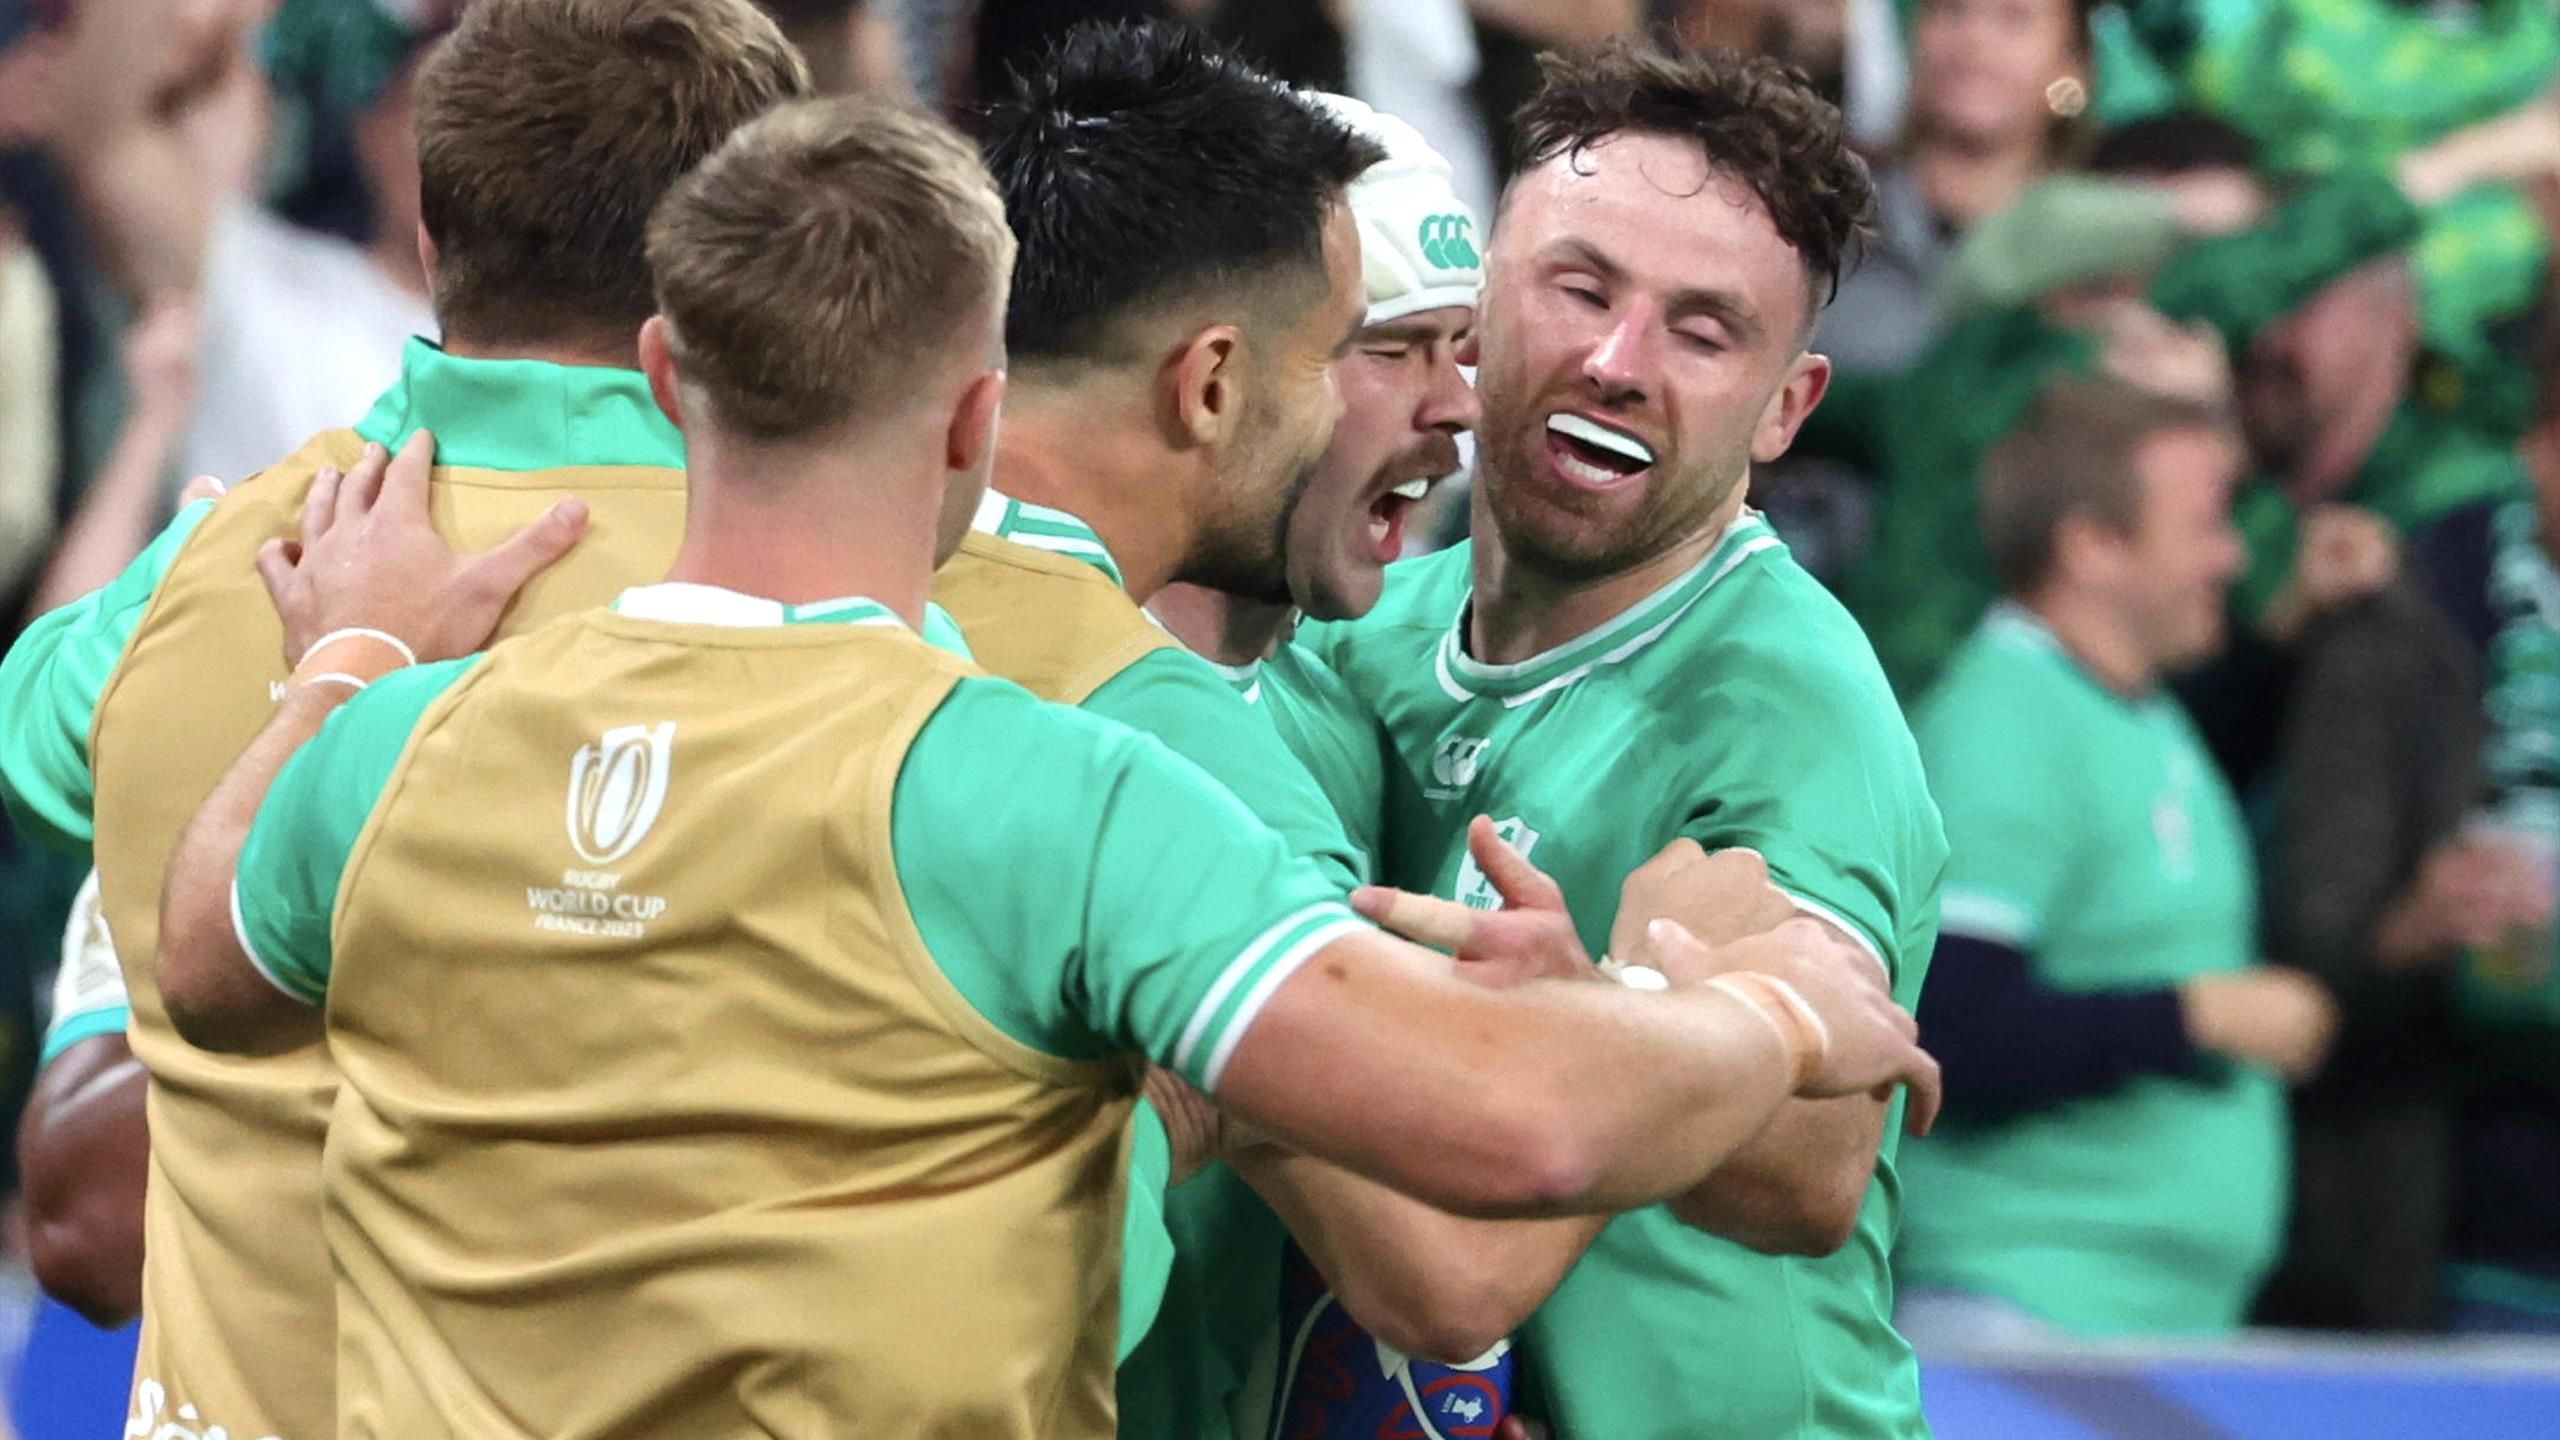 South Africa 8-13 Ireland Mack Hansen try helps secure thrilling win over Springboks at Rugby World Cup